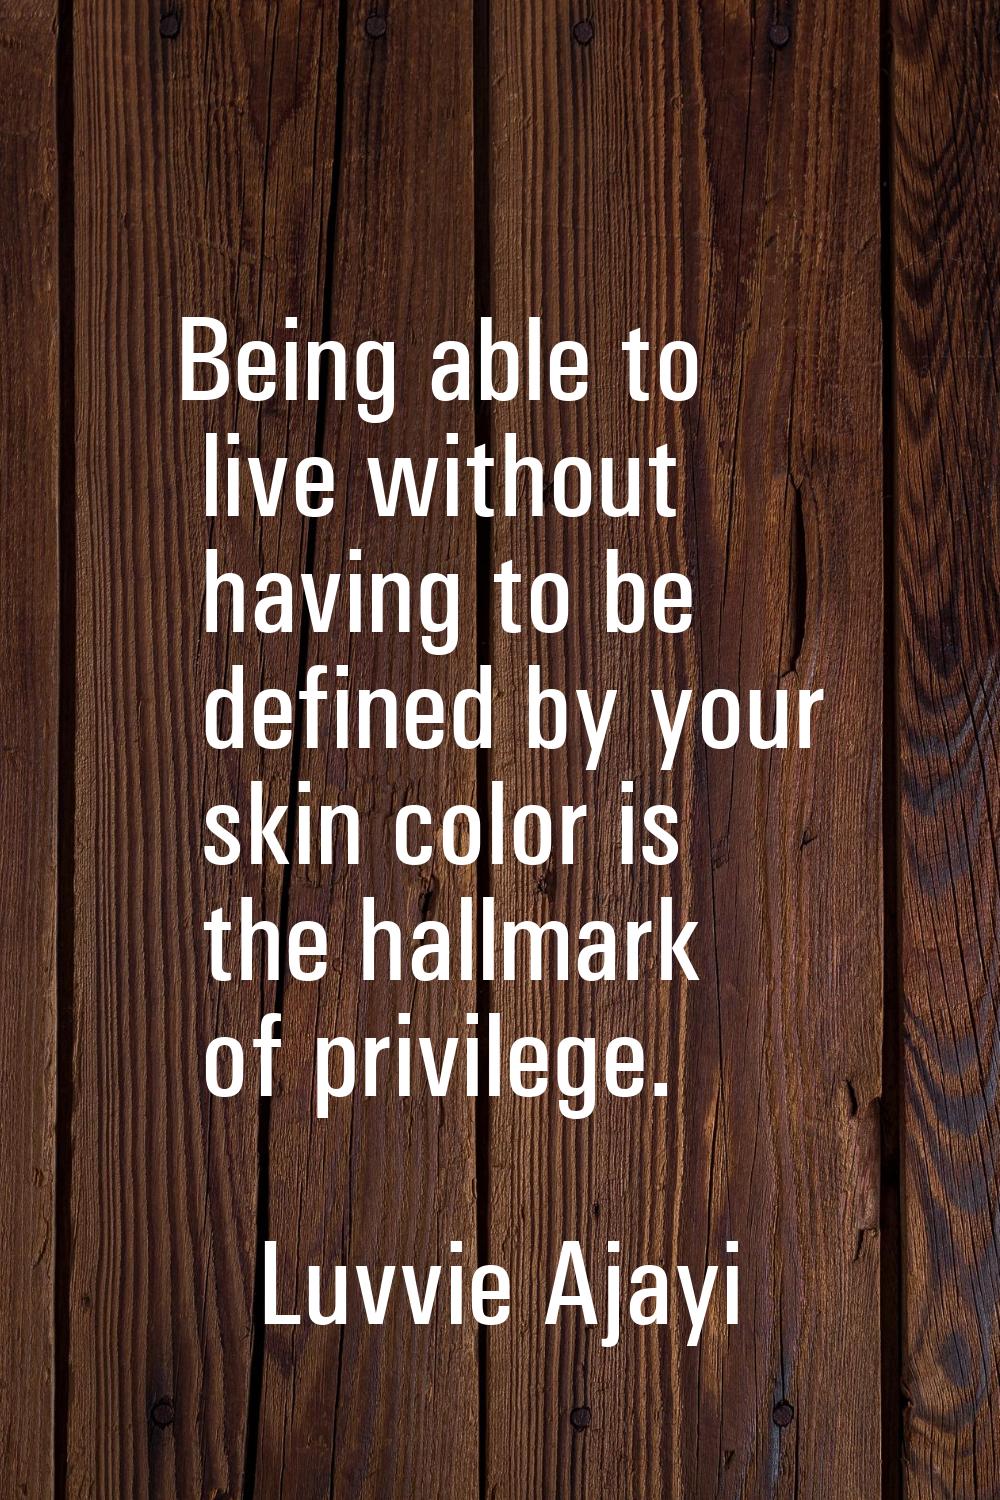 Being able to live without having to be defined by your skin color is the hallmark of privilege.